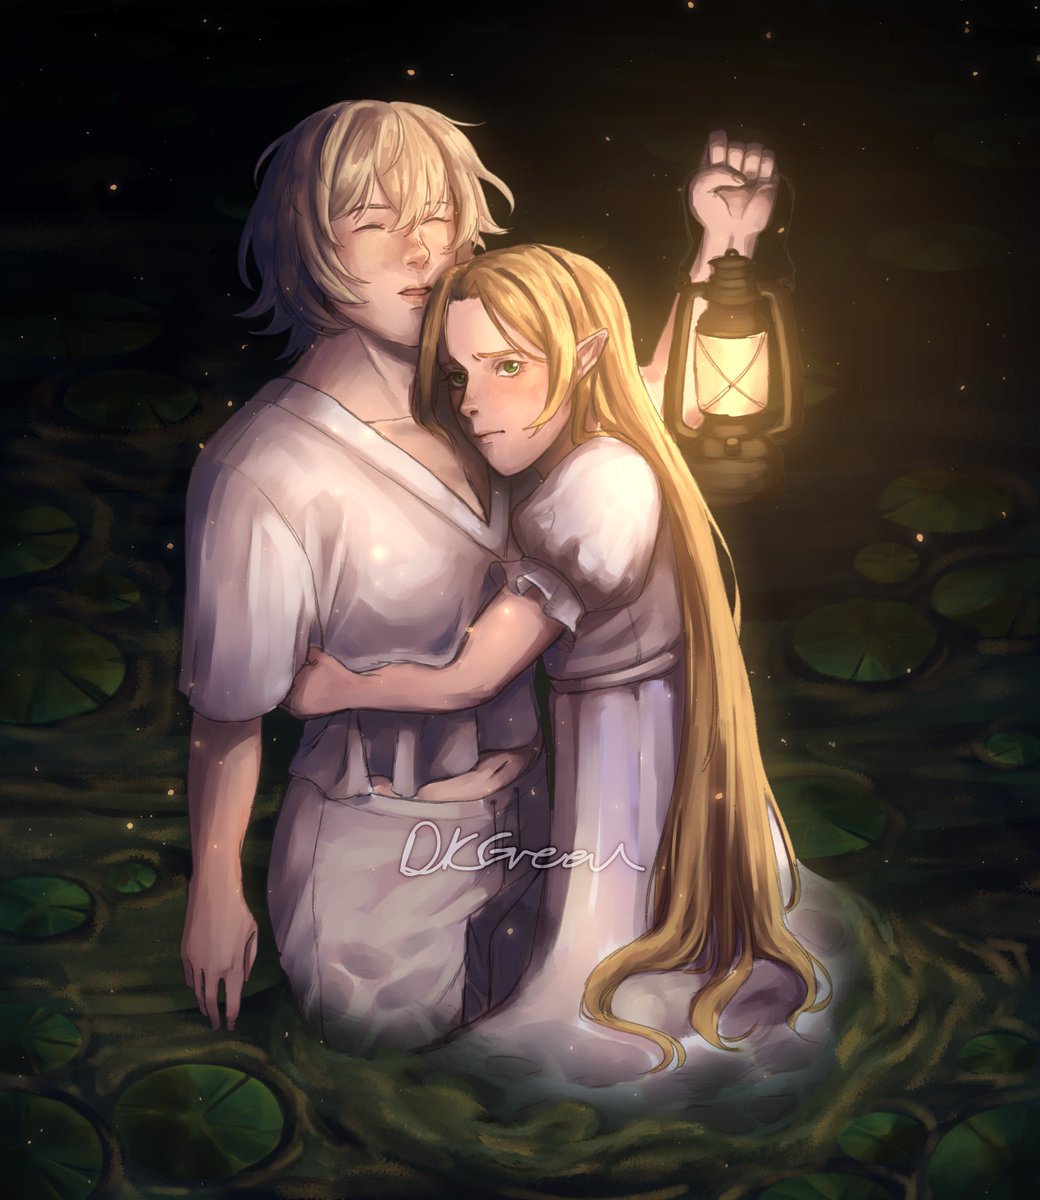 I finished this like a month ago and totally forgot about it 🫠. (Marcille is my favourite so far)
-
#delicousindungeon #dungeonmeshi #falin #marcille #farcille #falintouden #marcilledonato